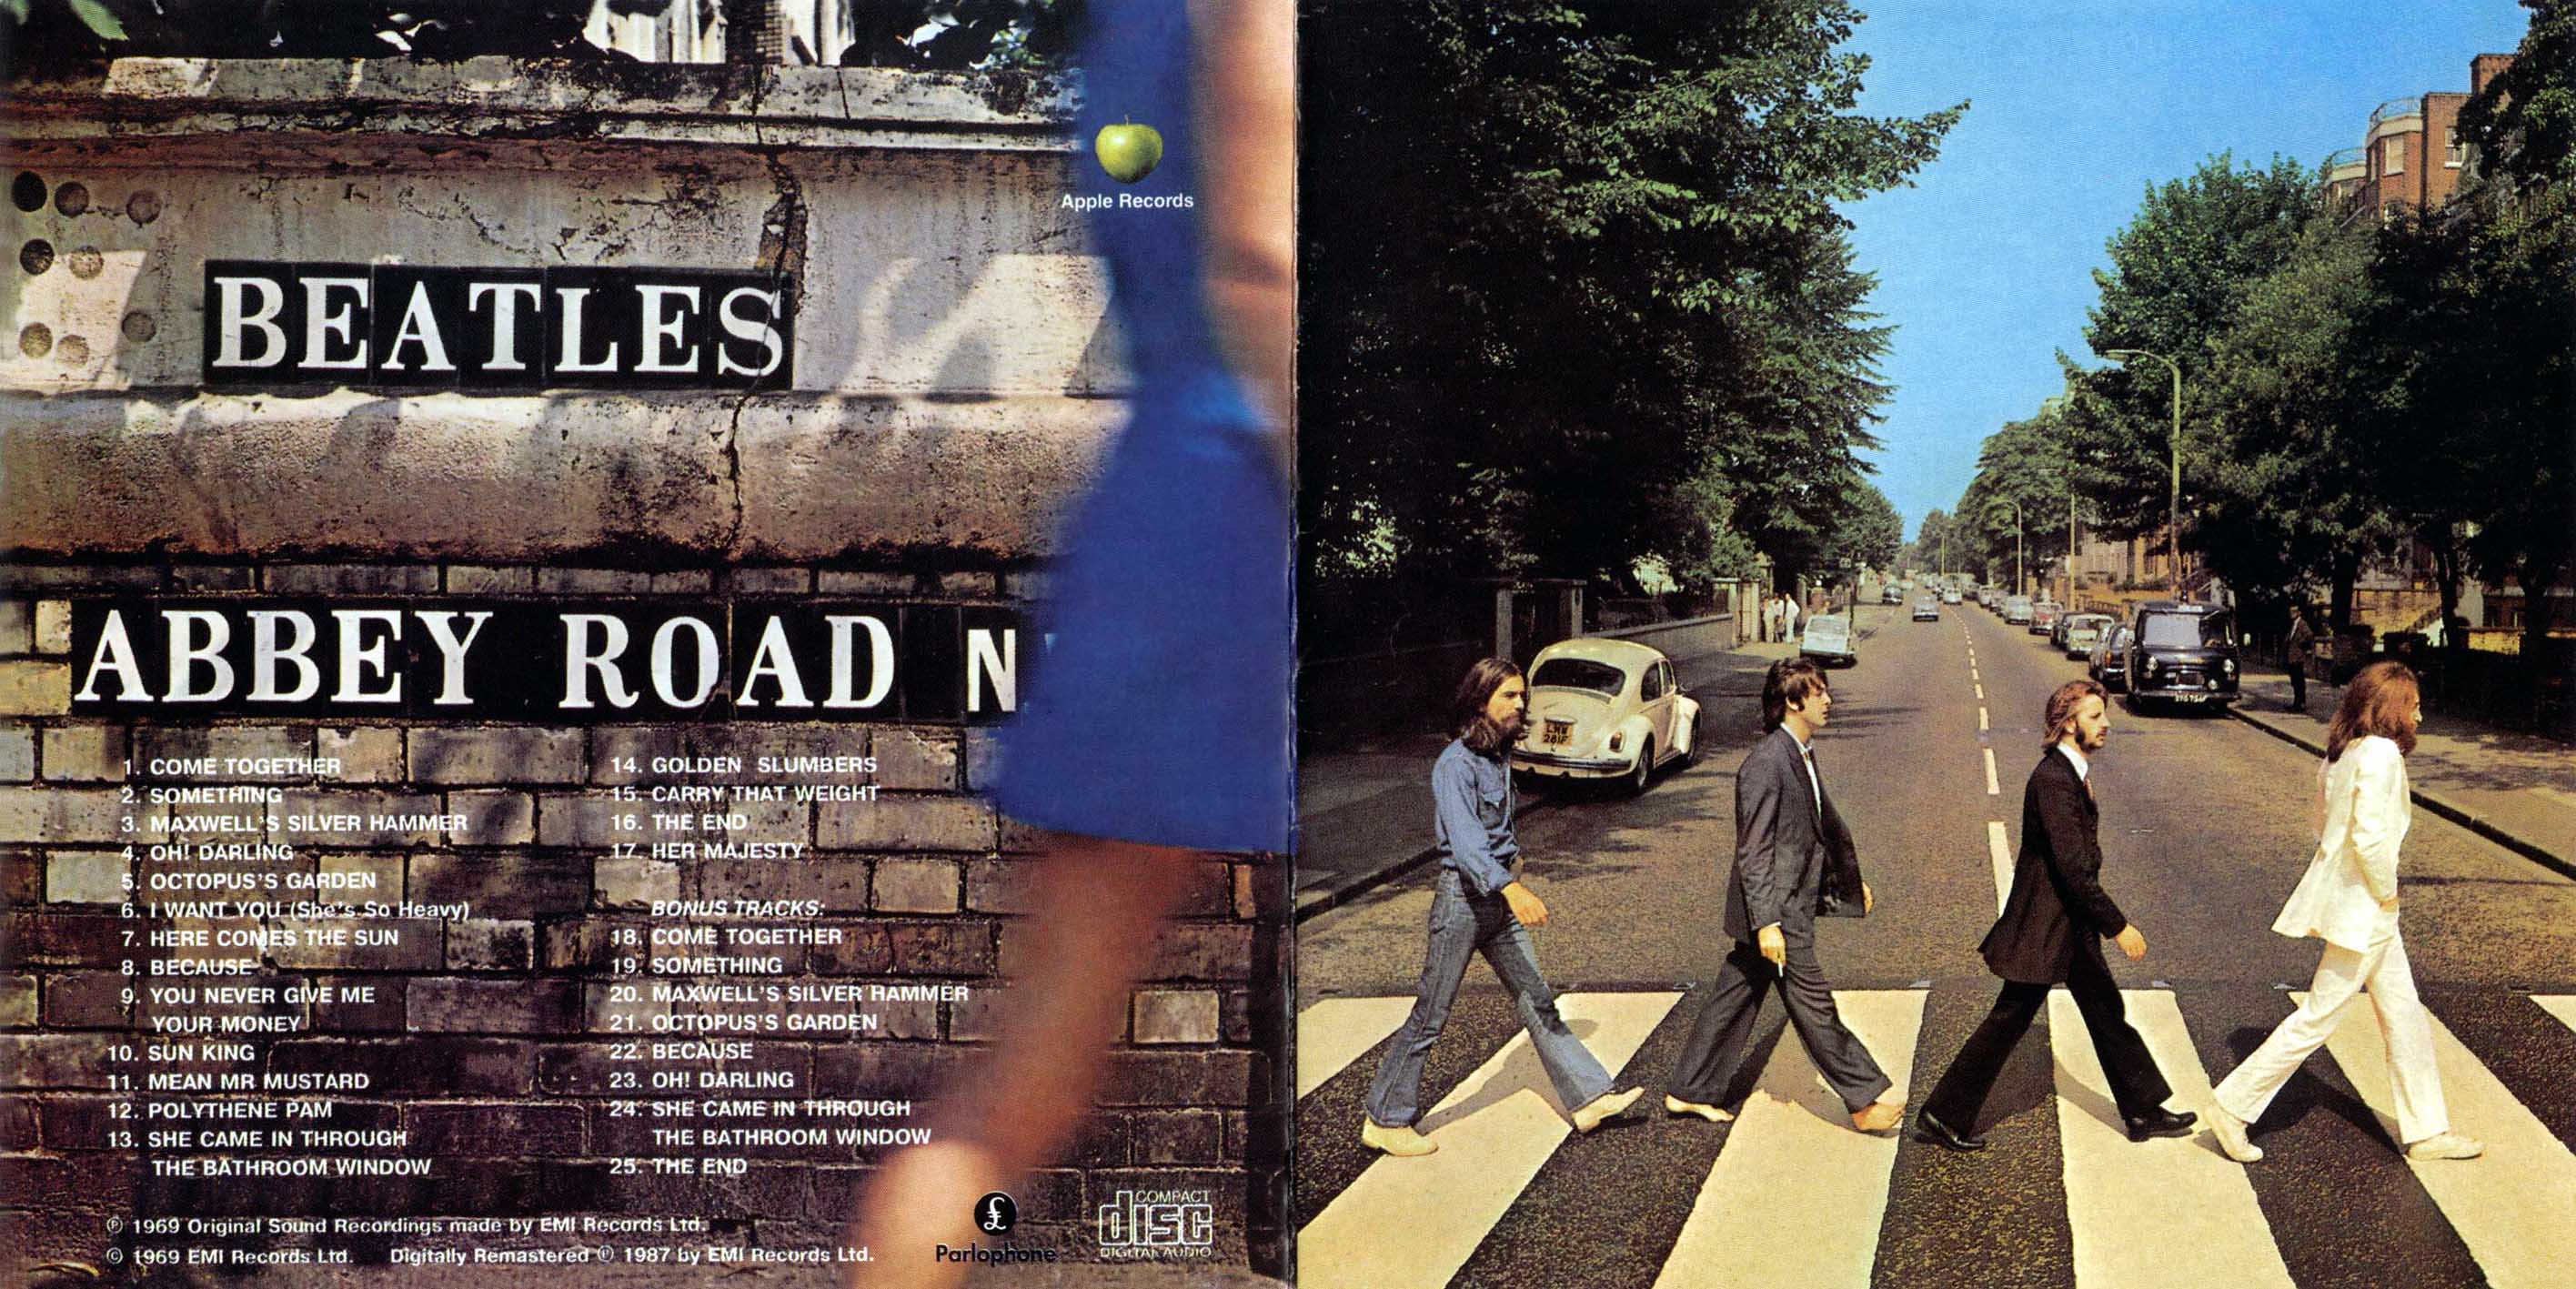 10 Facts You Probably Didn't Know About the Infamous Abbey Road Cover